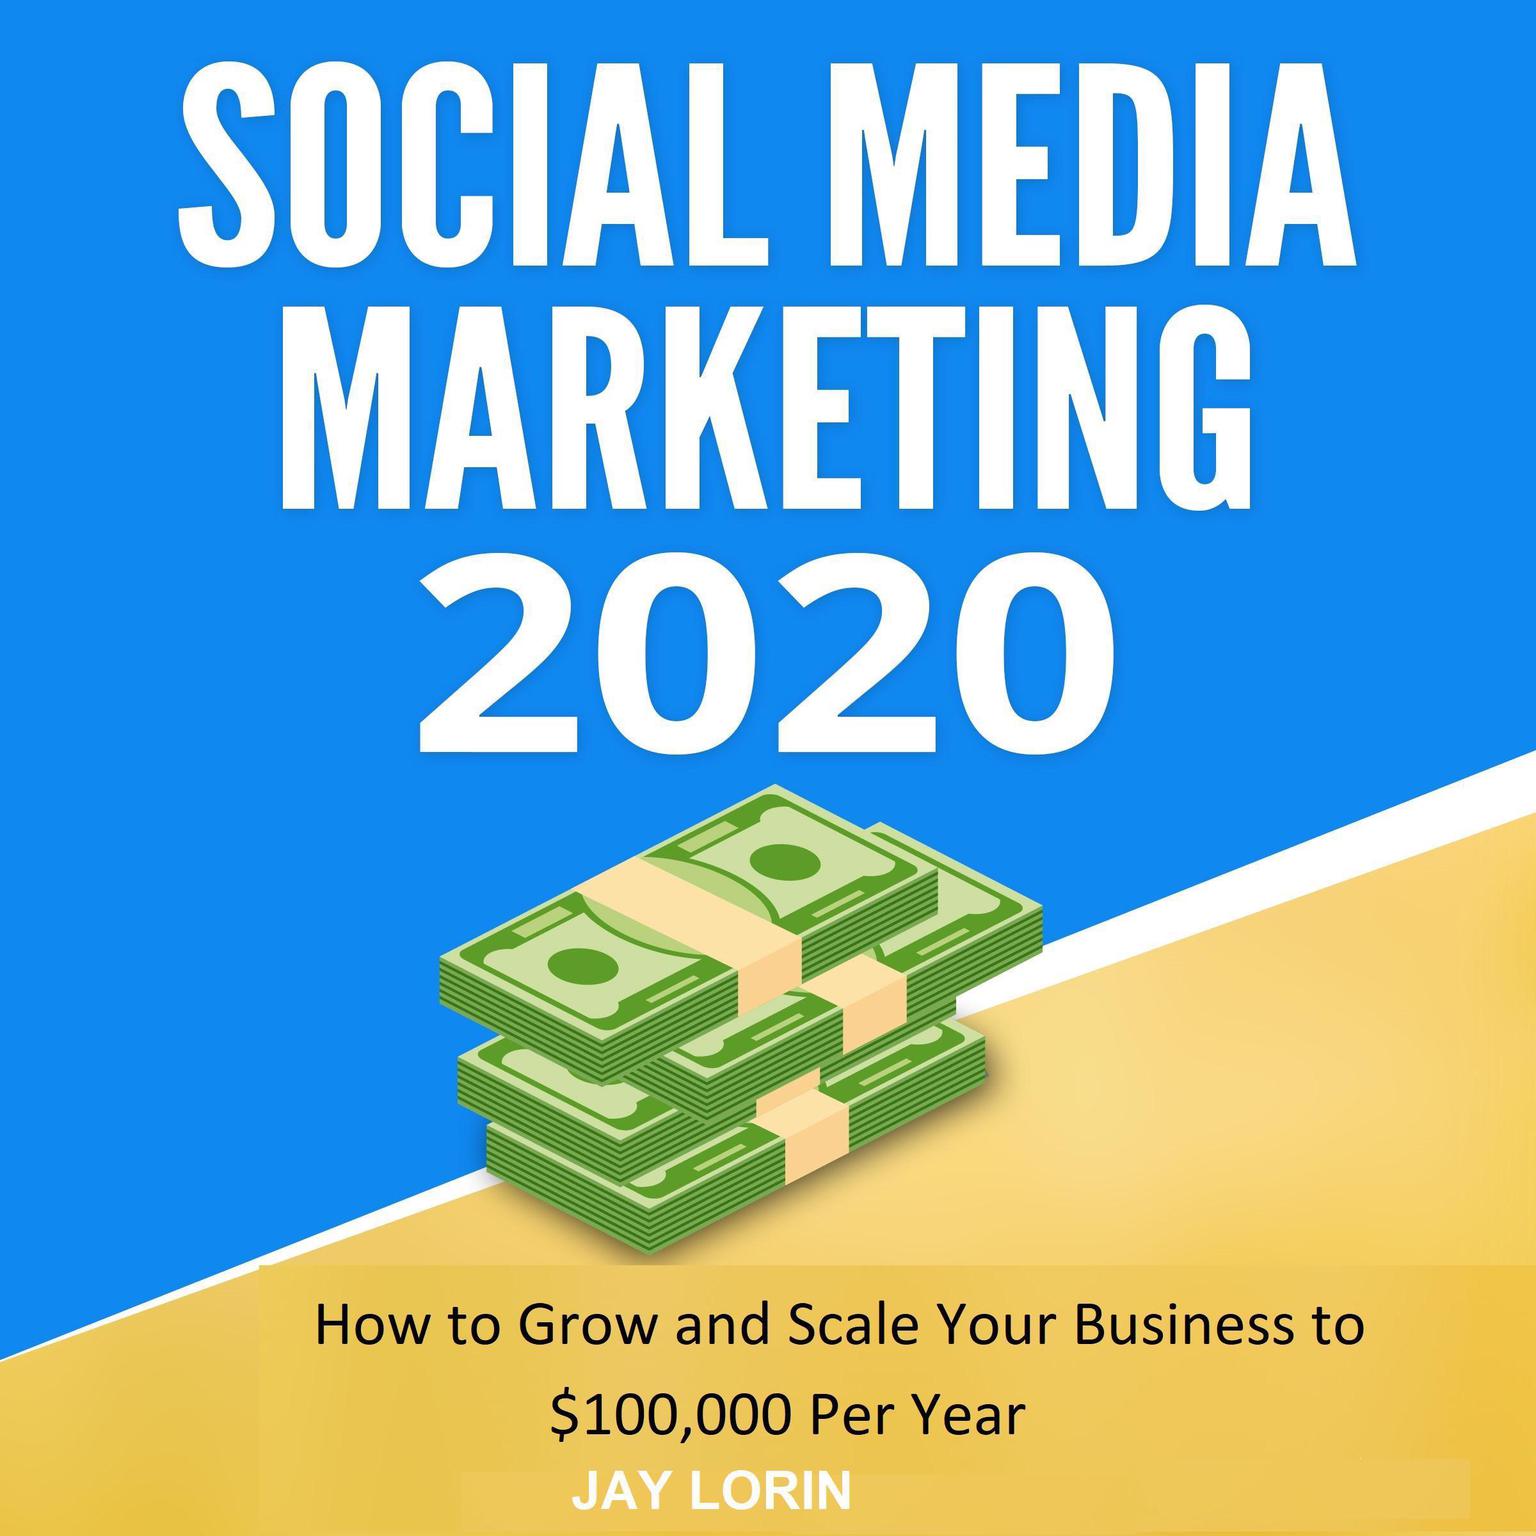 Social Media Marketing 2020: How to Grow and Scale Your Business to $100,000 per Year Audiobook, by Jay Lorin